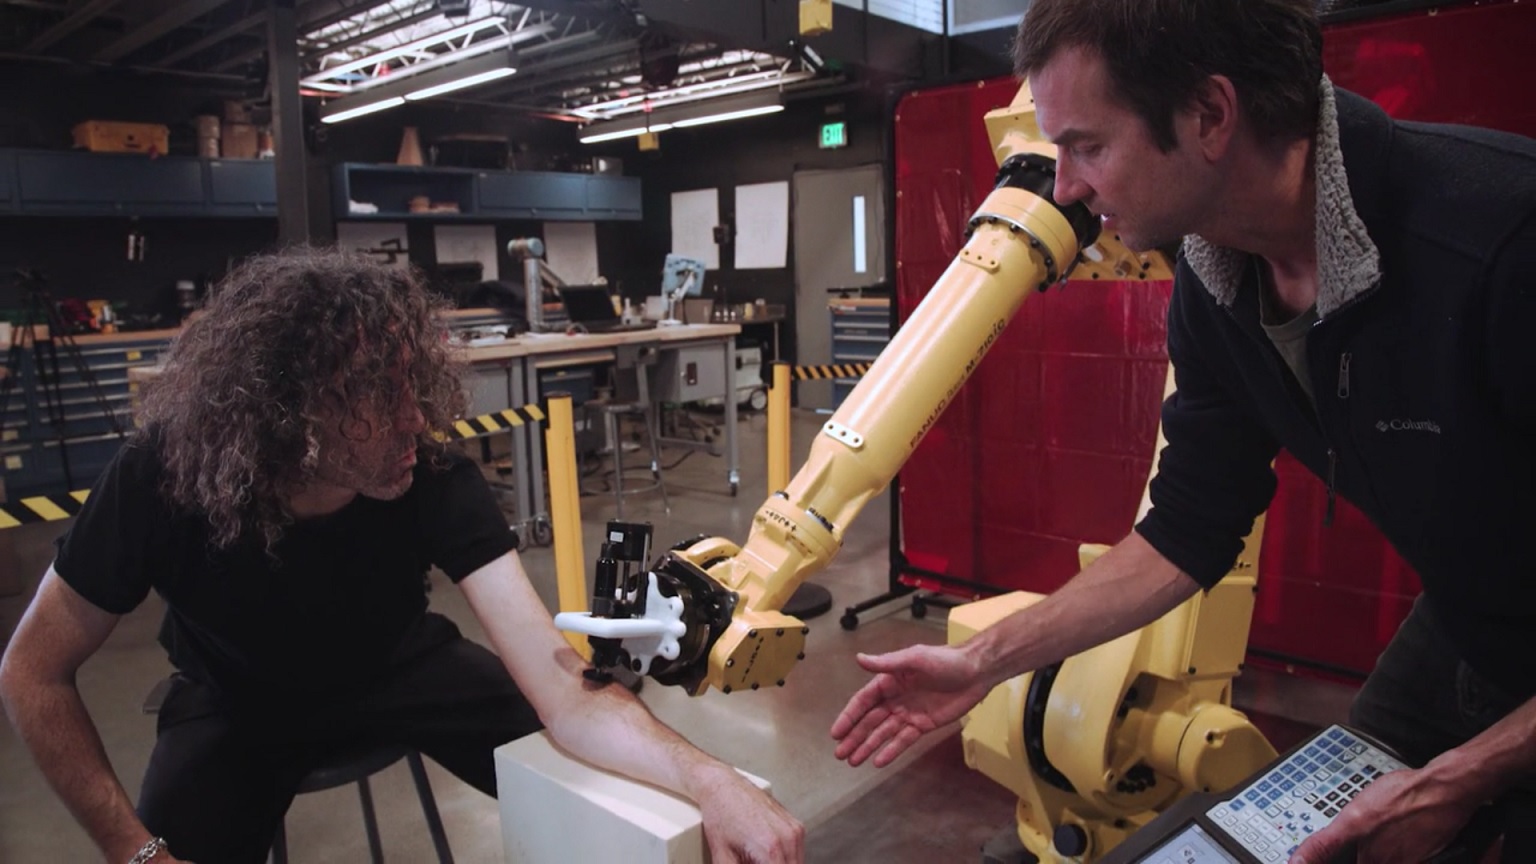 This is the first robot capable of doing tattoos